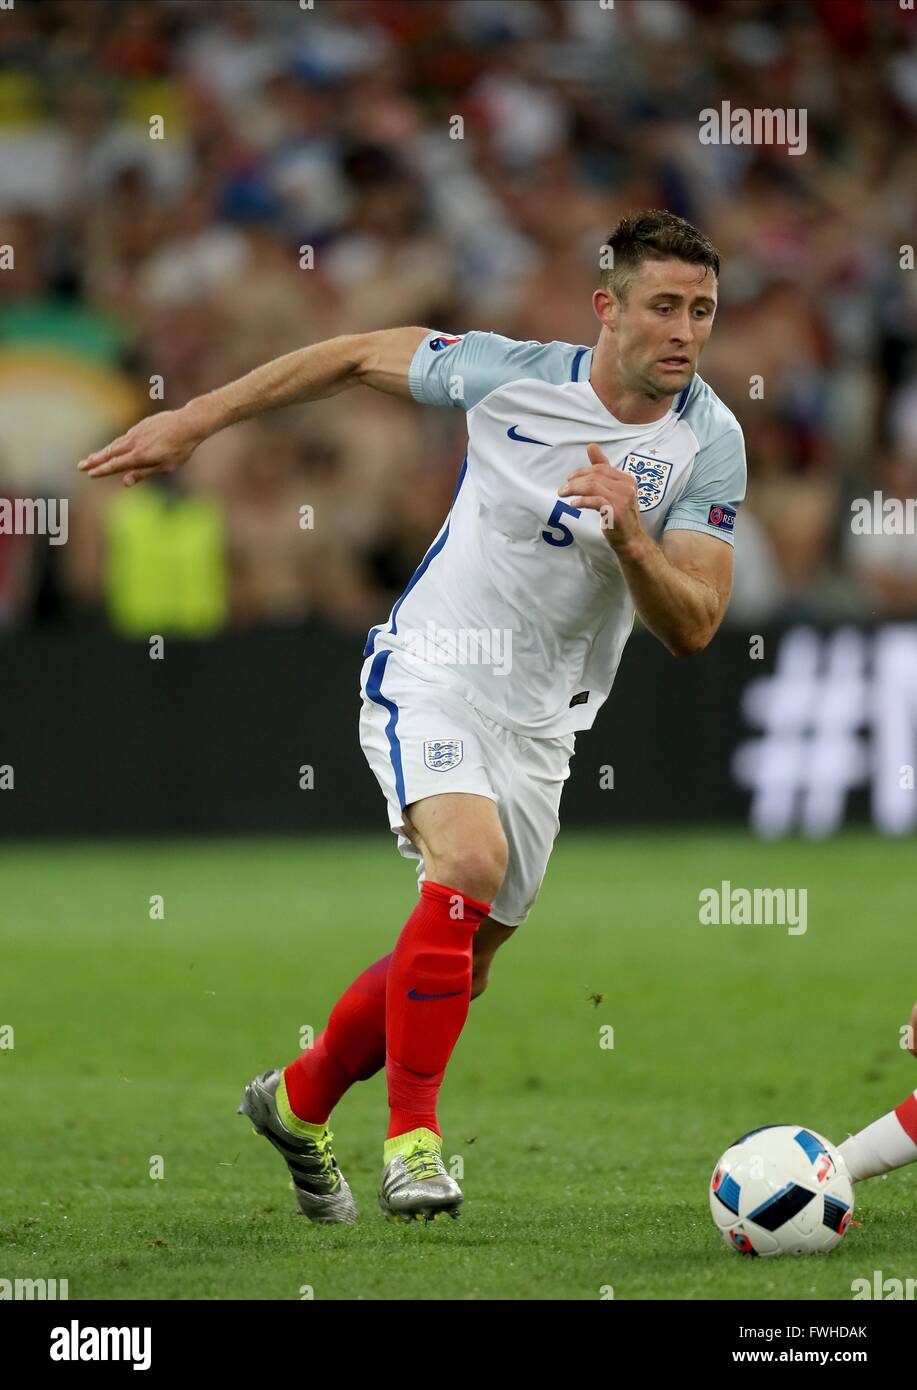 ENGLAND'S GARY CAHILL  ENGLAND V RUSSIA  ENGLAND V RUSSIA, EURO 2016 GROUP B  STADE VELODROME, MARSEILLE, FRANCE  12 June 2016  GAY96468      ENGLAND V RUSSIA, EURO 2016 Group B 11/06/2016        WARNING! This Photograph May Only Be Used For Newspaper And/Or Magazine Editorial Purposes. May Not Be Used For Publications Involving 1 player, 1 Club Or 1 Competition  Without Written Authorisation From Football DataCo Ltd.  For Any Queries, Please Contact Football DataCo Ltd on +44 (0) 207 864 9121 Stock Photo